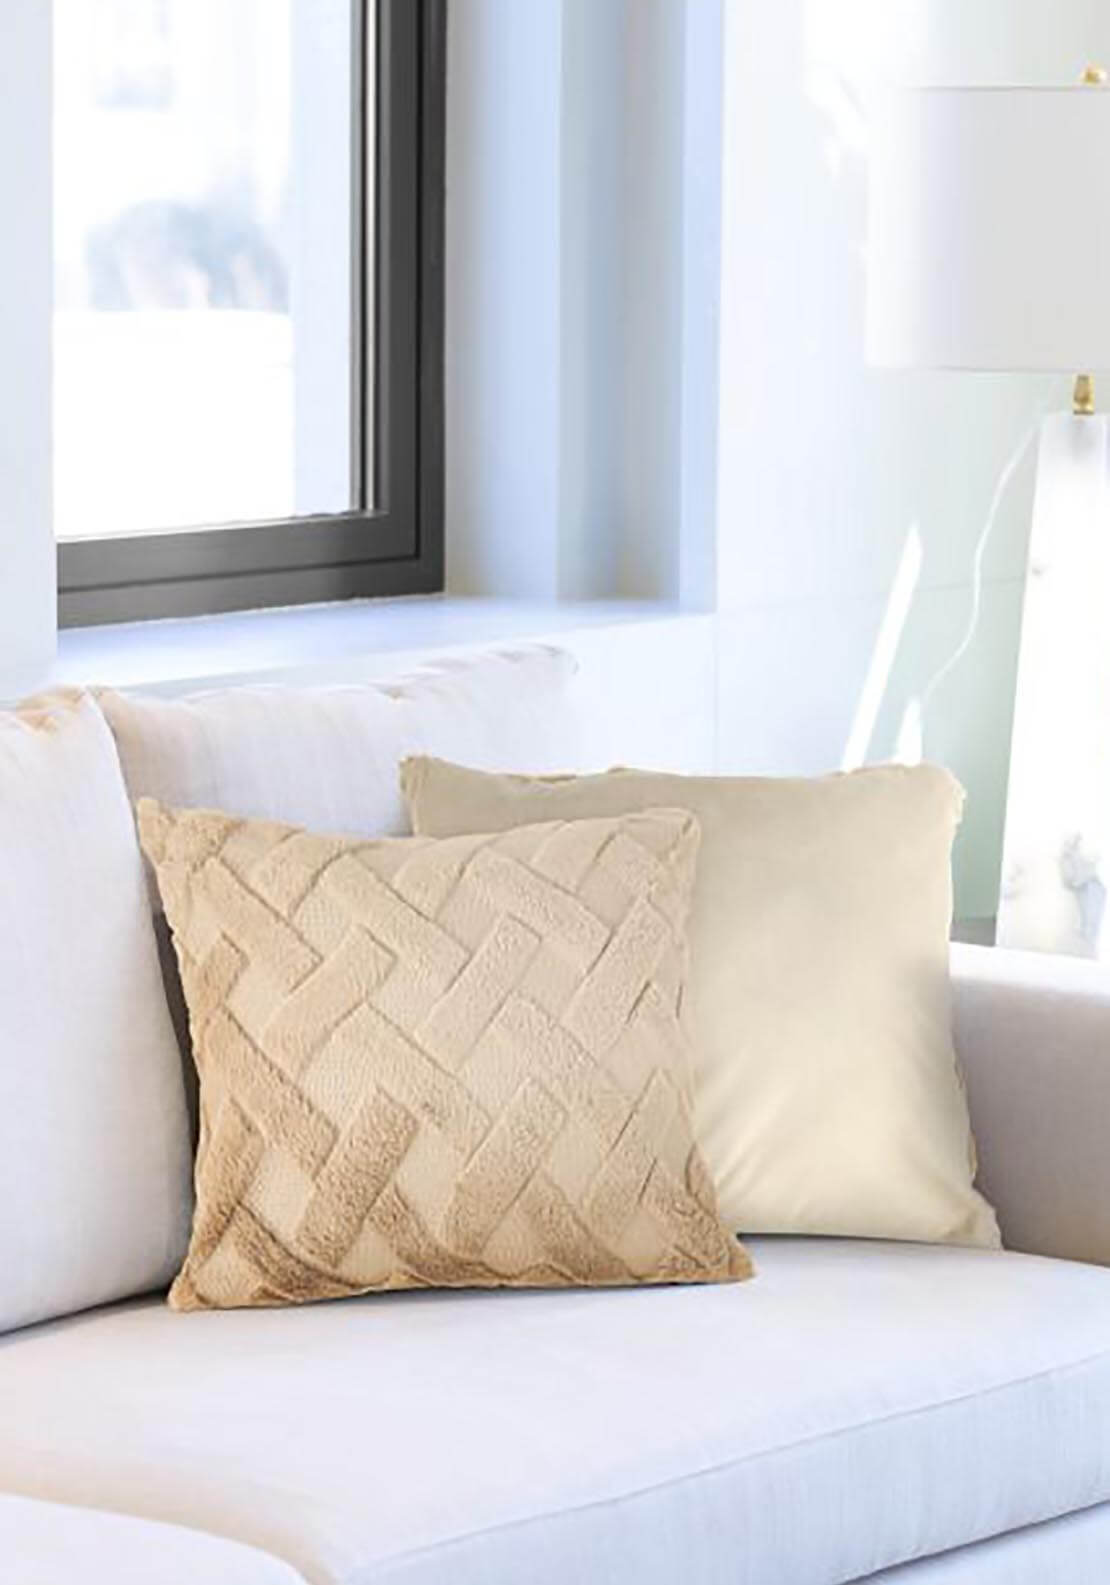 The Home Collection Nyla Cushion - Taupe 1 Shaws Department Stores